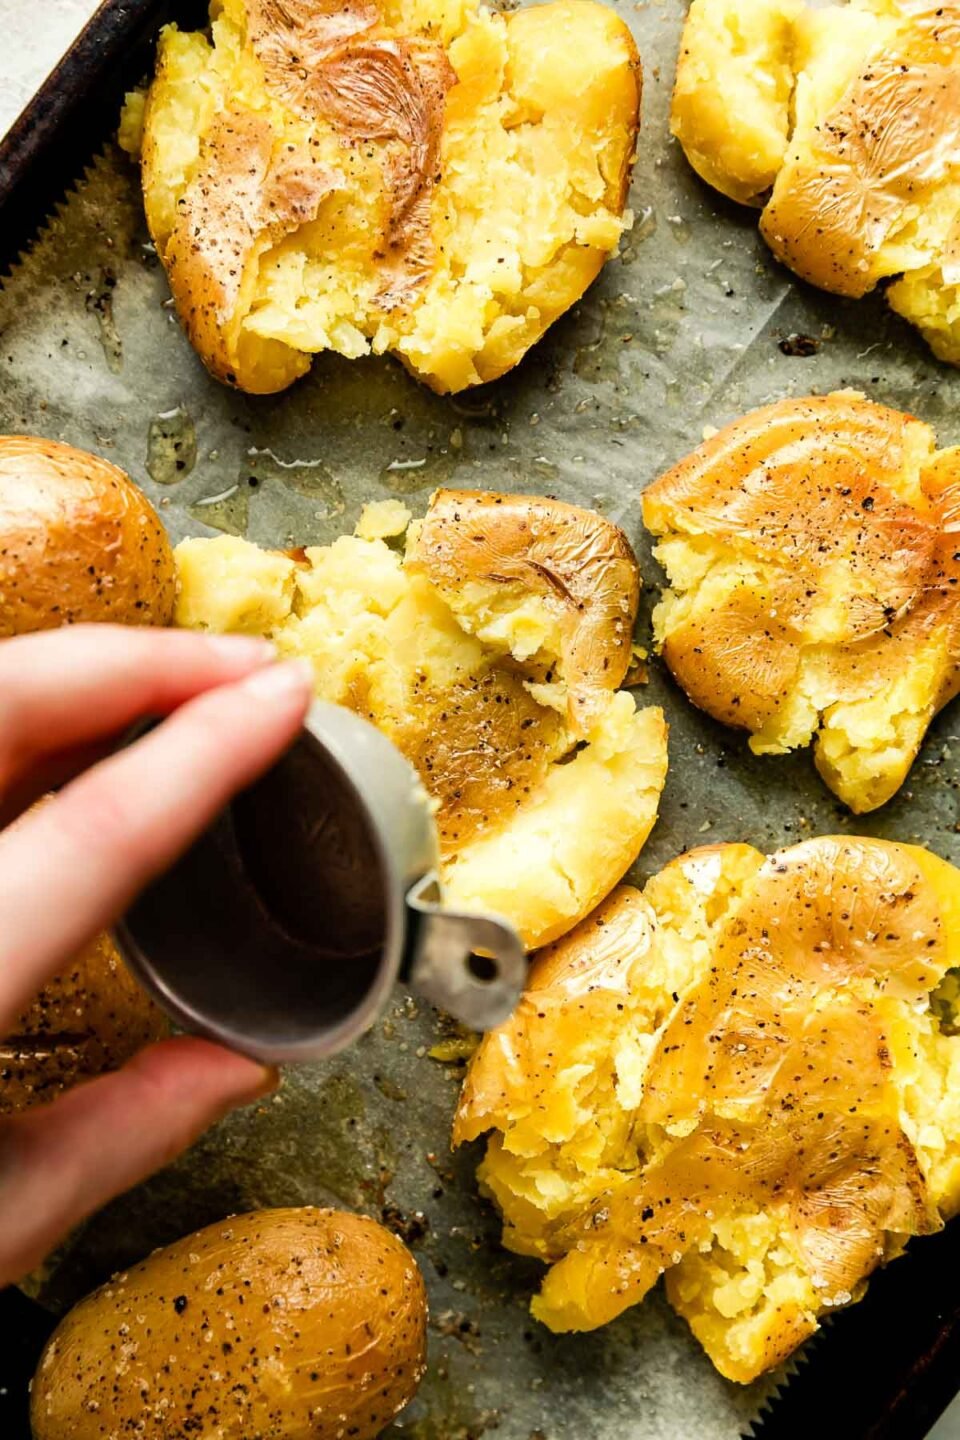 Crispy smashed potatoes are arranged atop a baking sheet lined with parchment paper.